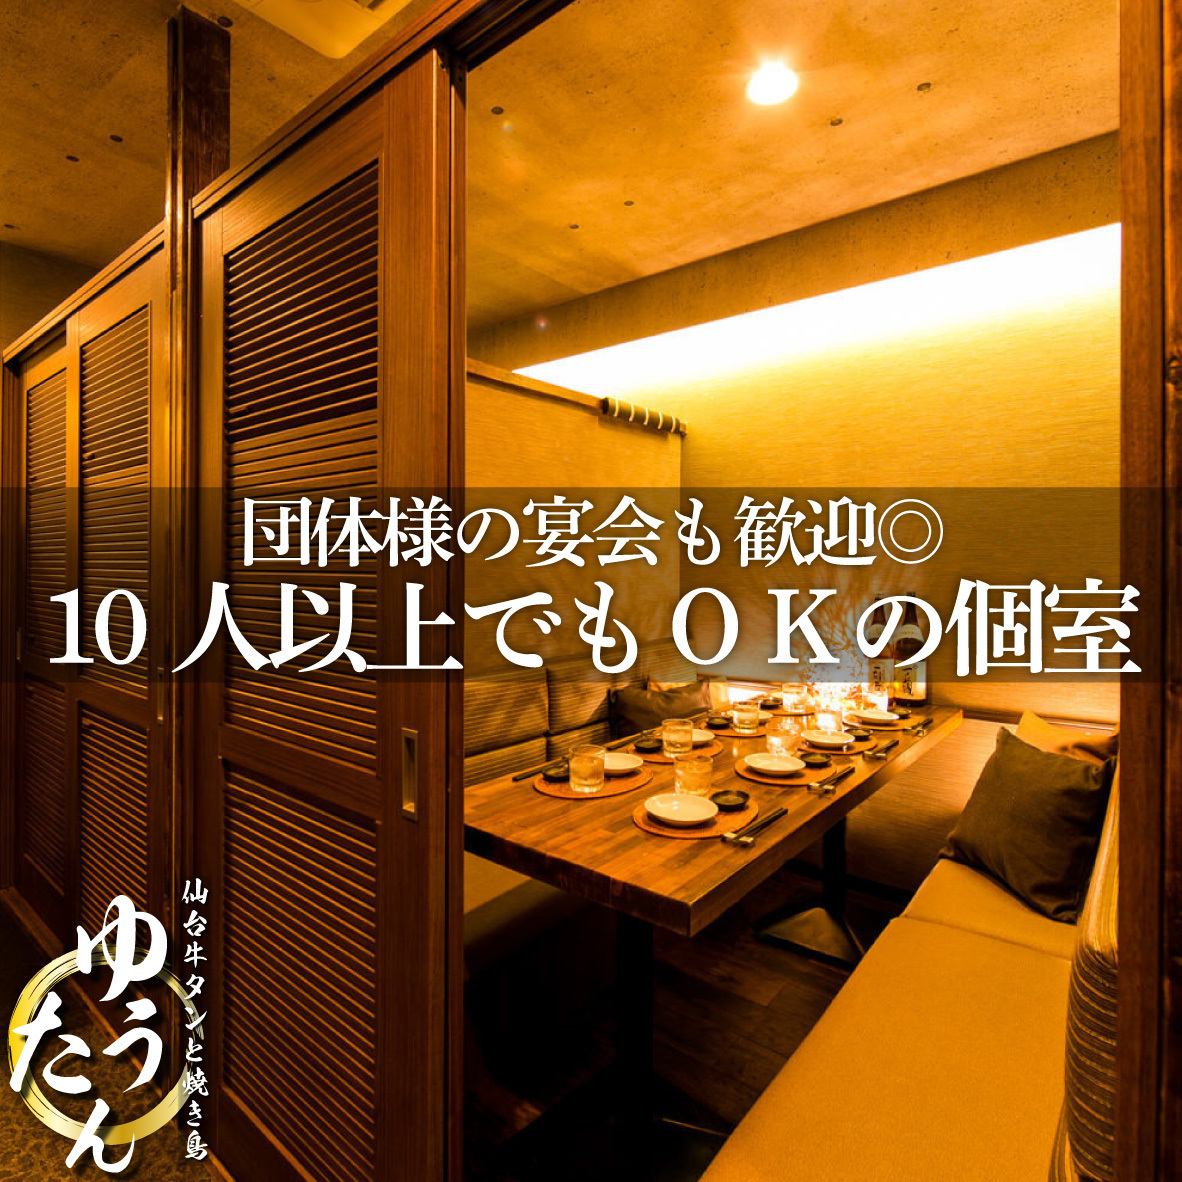 Coupons available for event organizers ◎ 3-hour all-you-can-drink course from 3,000 yen♪